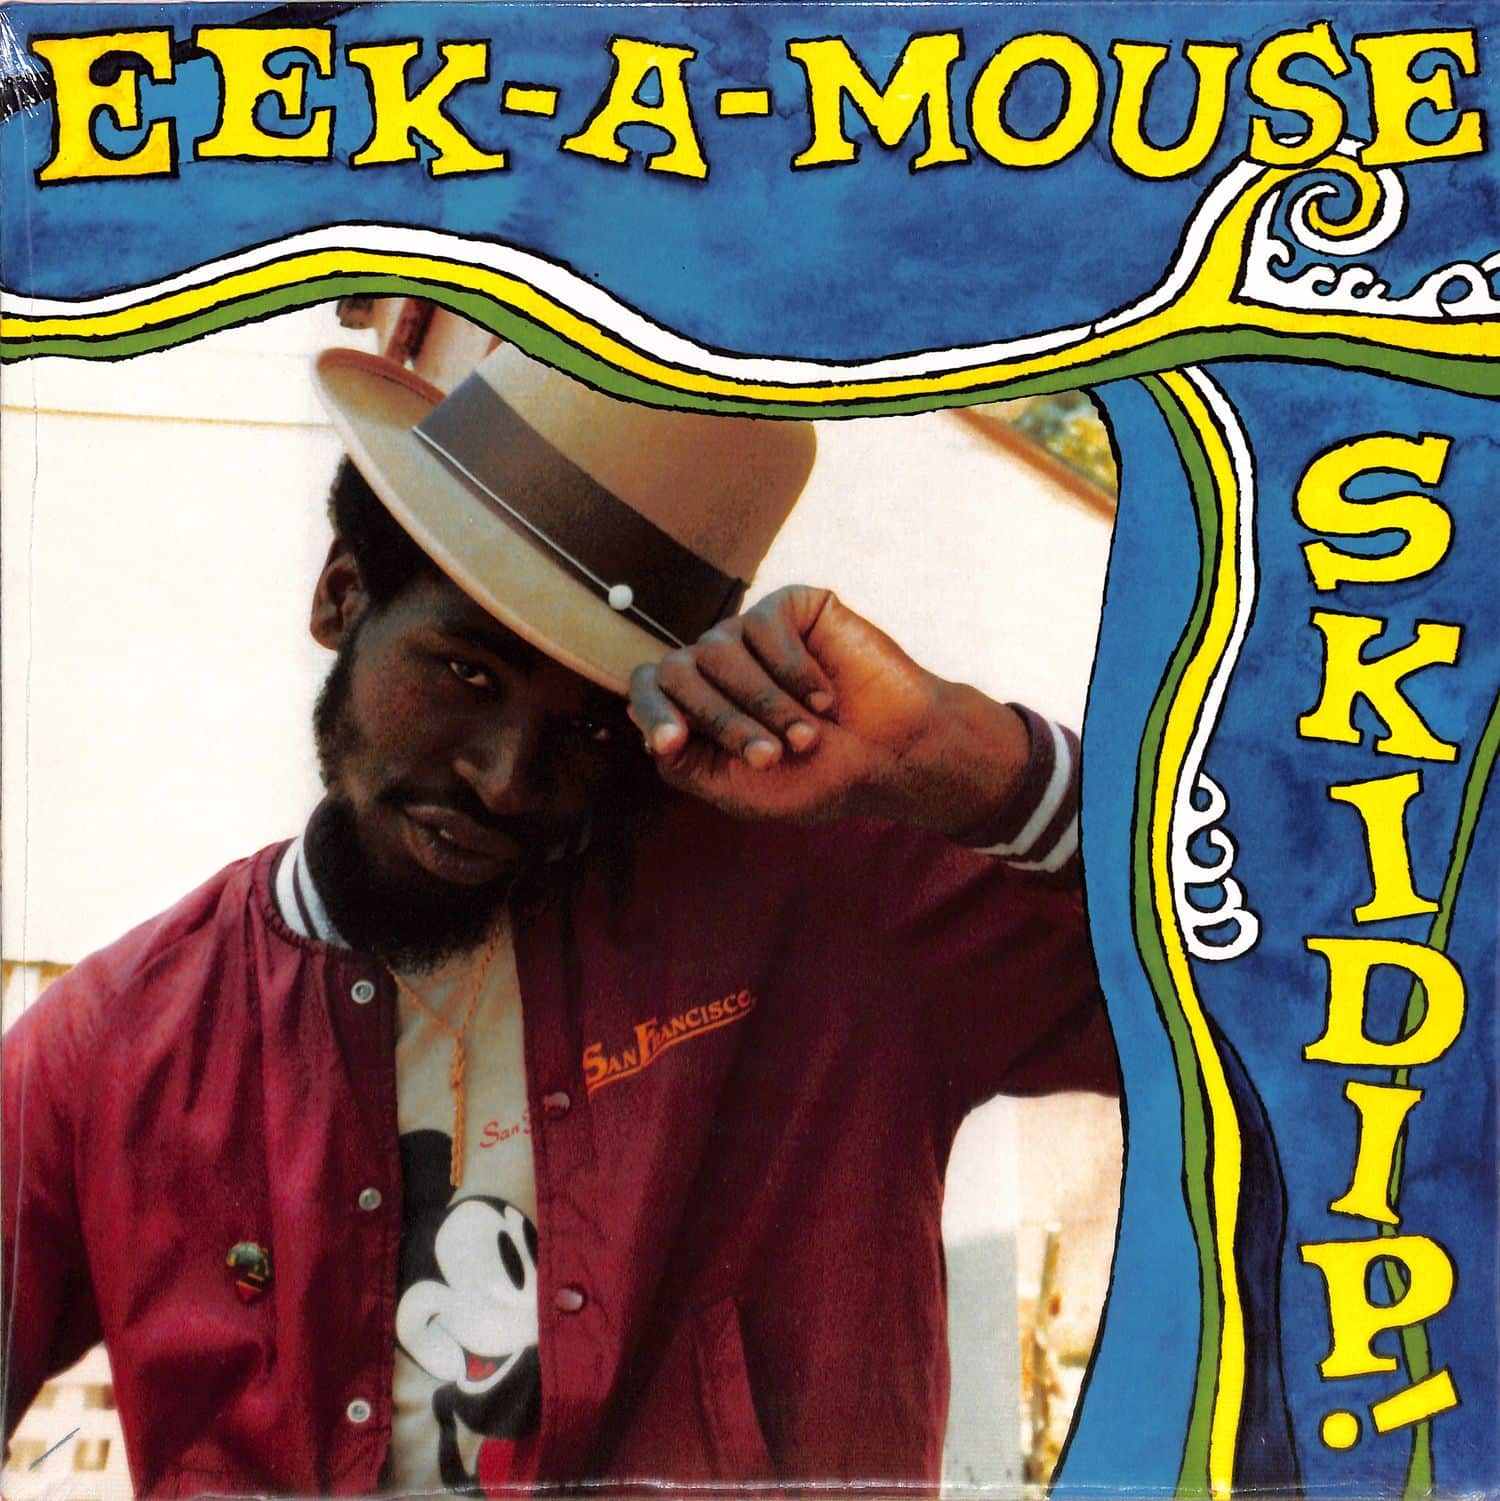 Eek-A-Mouse - SKIDIP! 